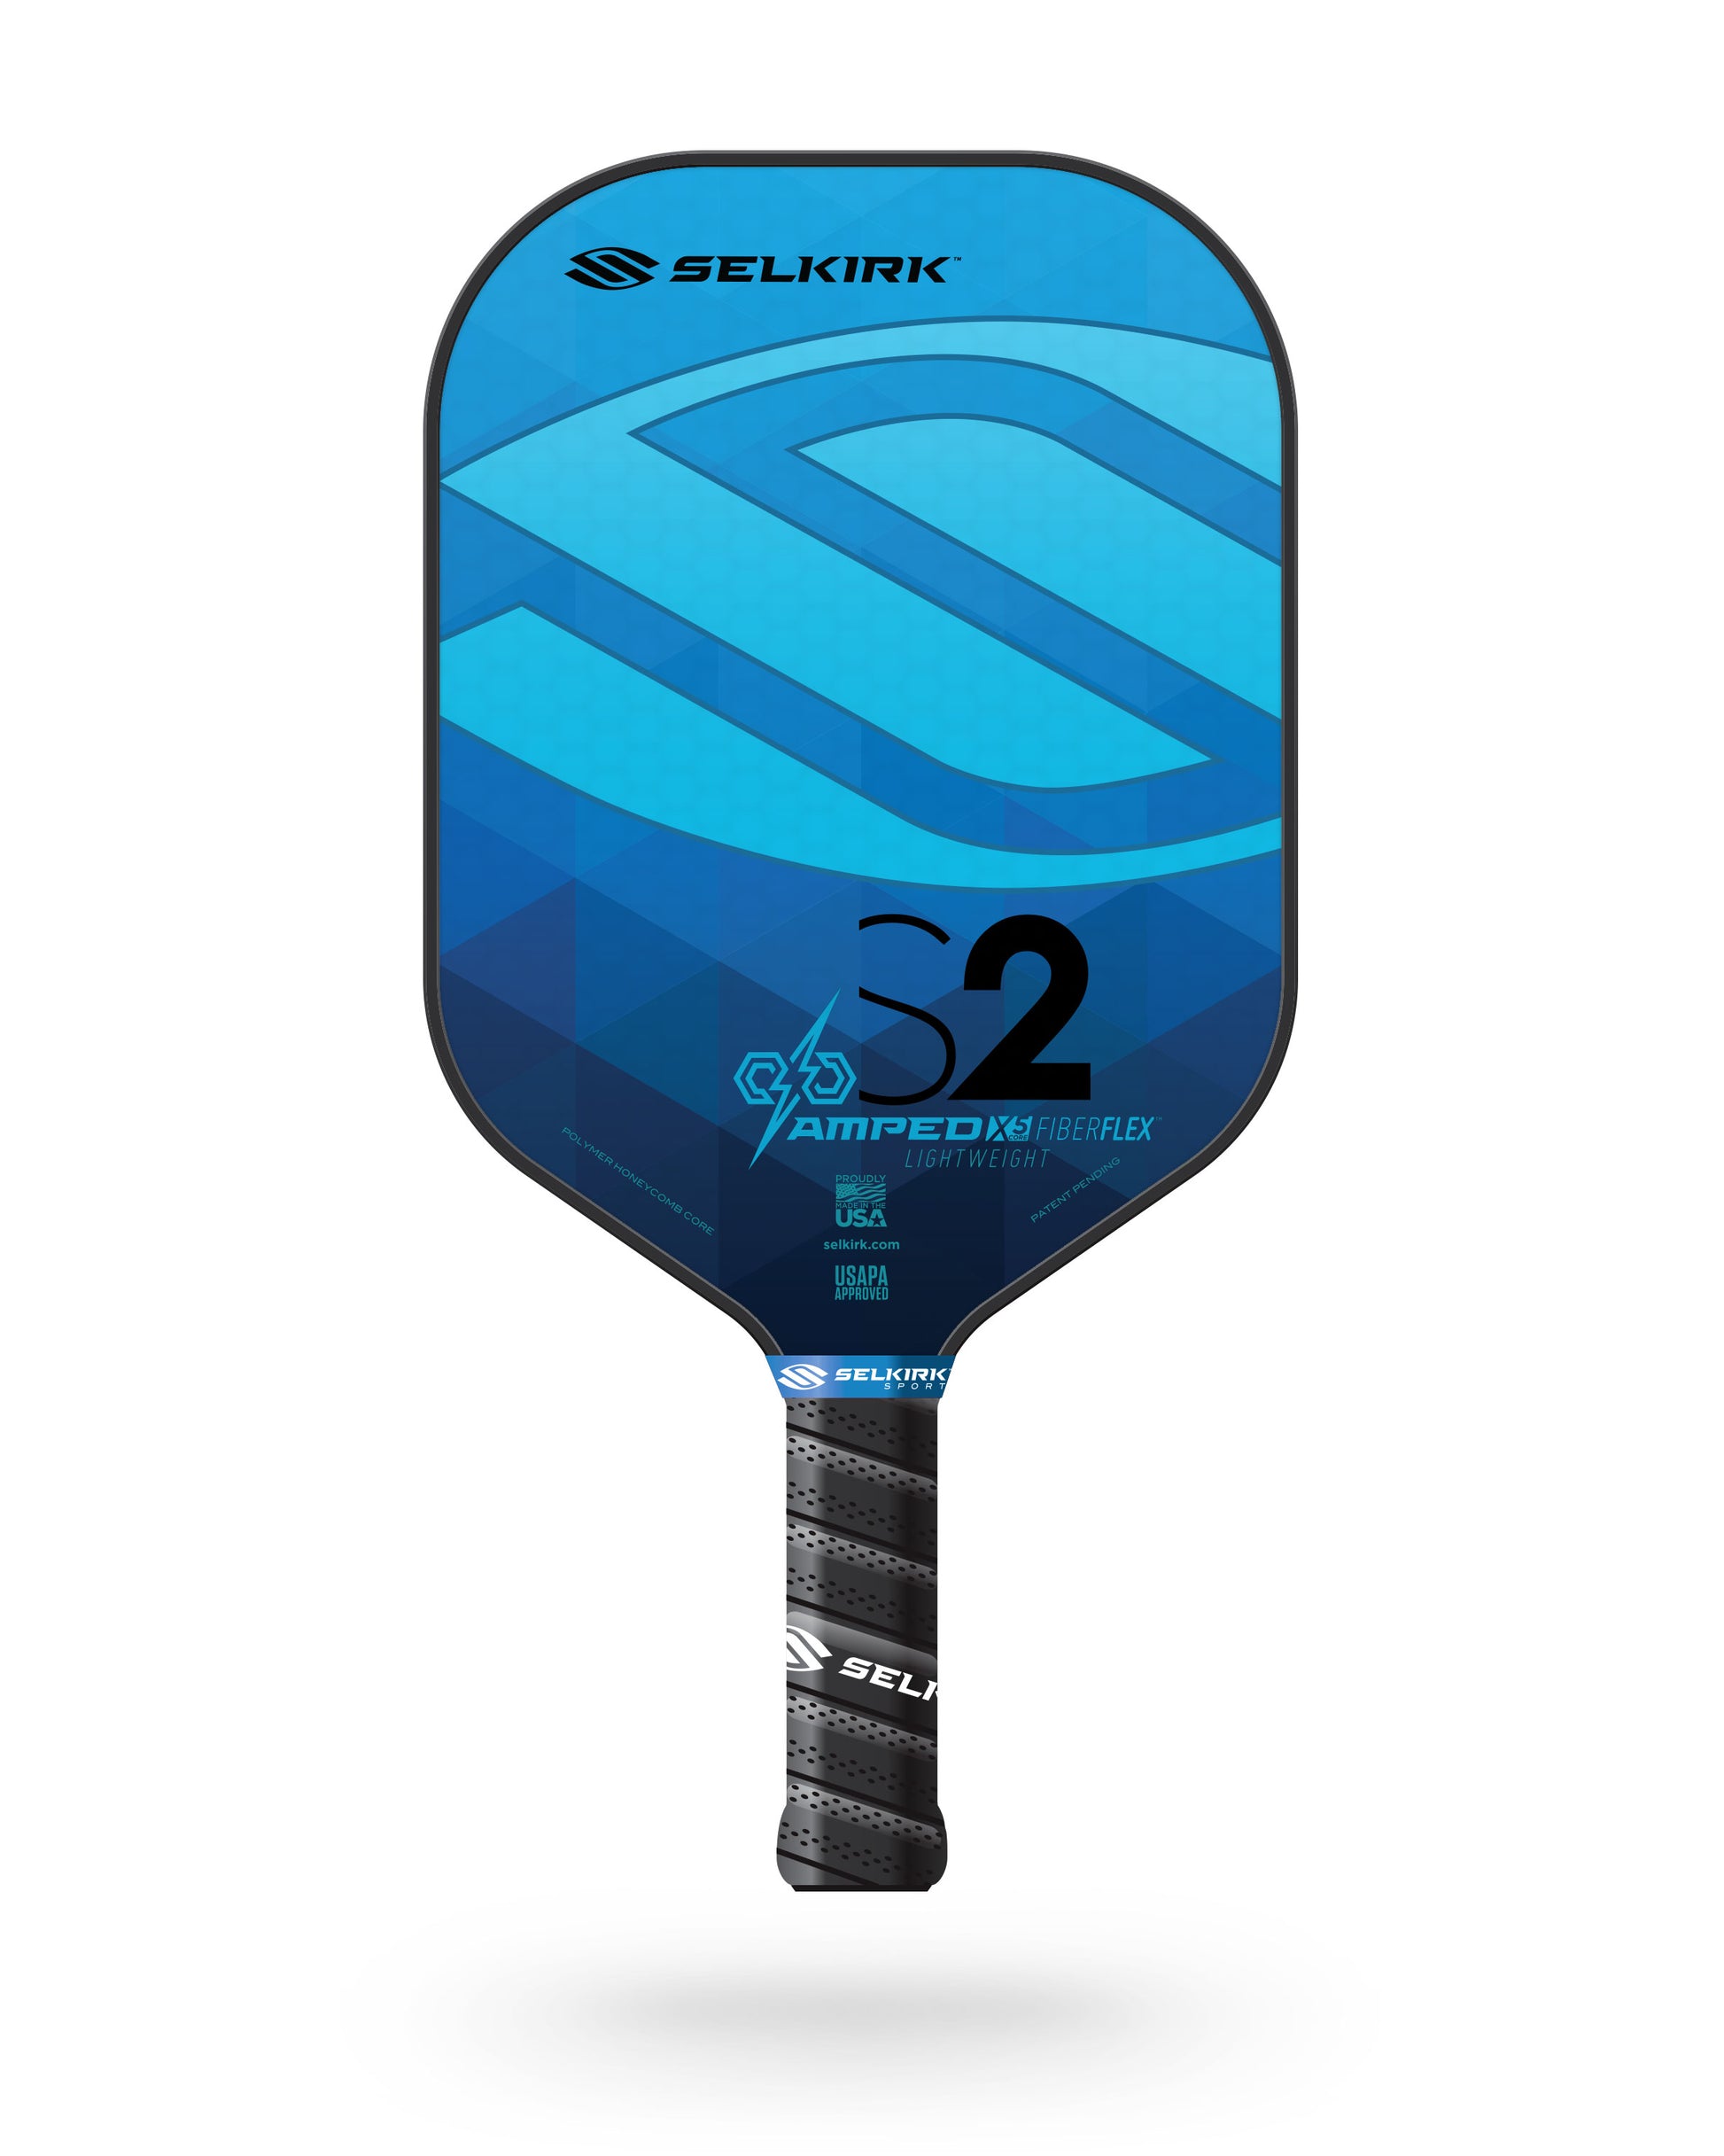 Selkirk AMPED S2 Pickleball Paddle in blue and teal